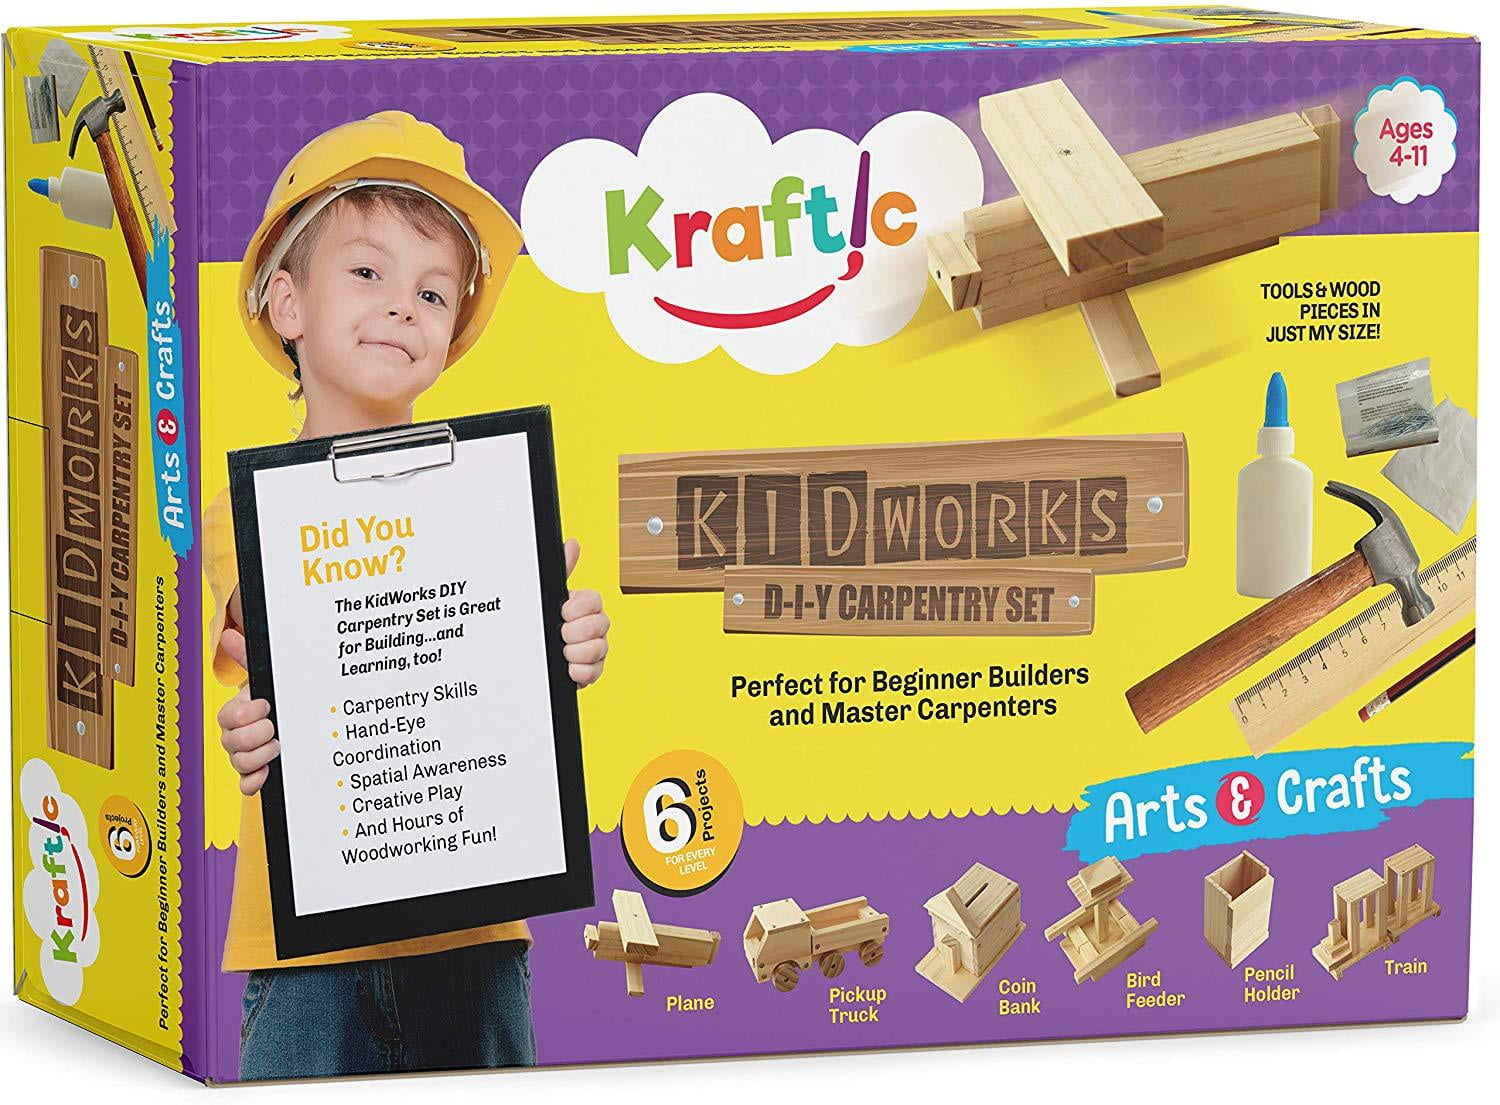 Kraftic Woodworking Building Kit for Kids and Adults, with 2 Educational  DIY Carpentry Construction Wood Model Kit Toy Projects for Boys and Girls 